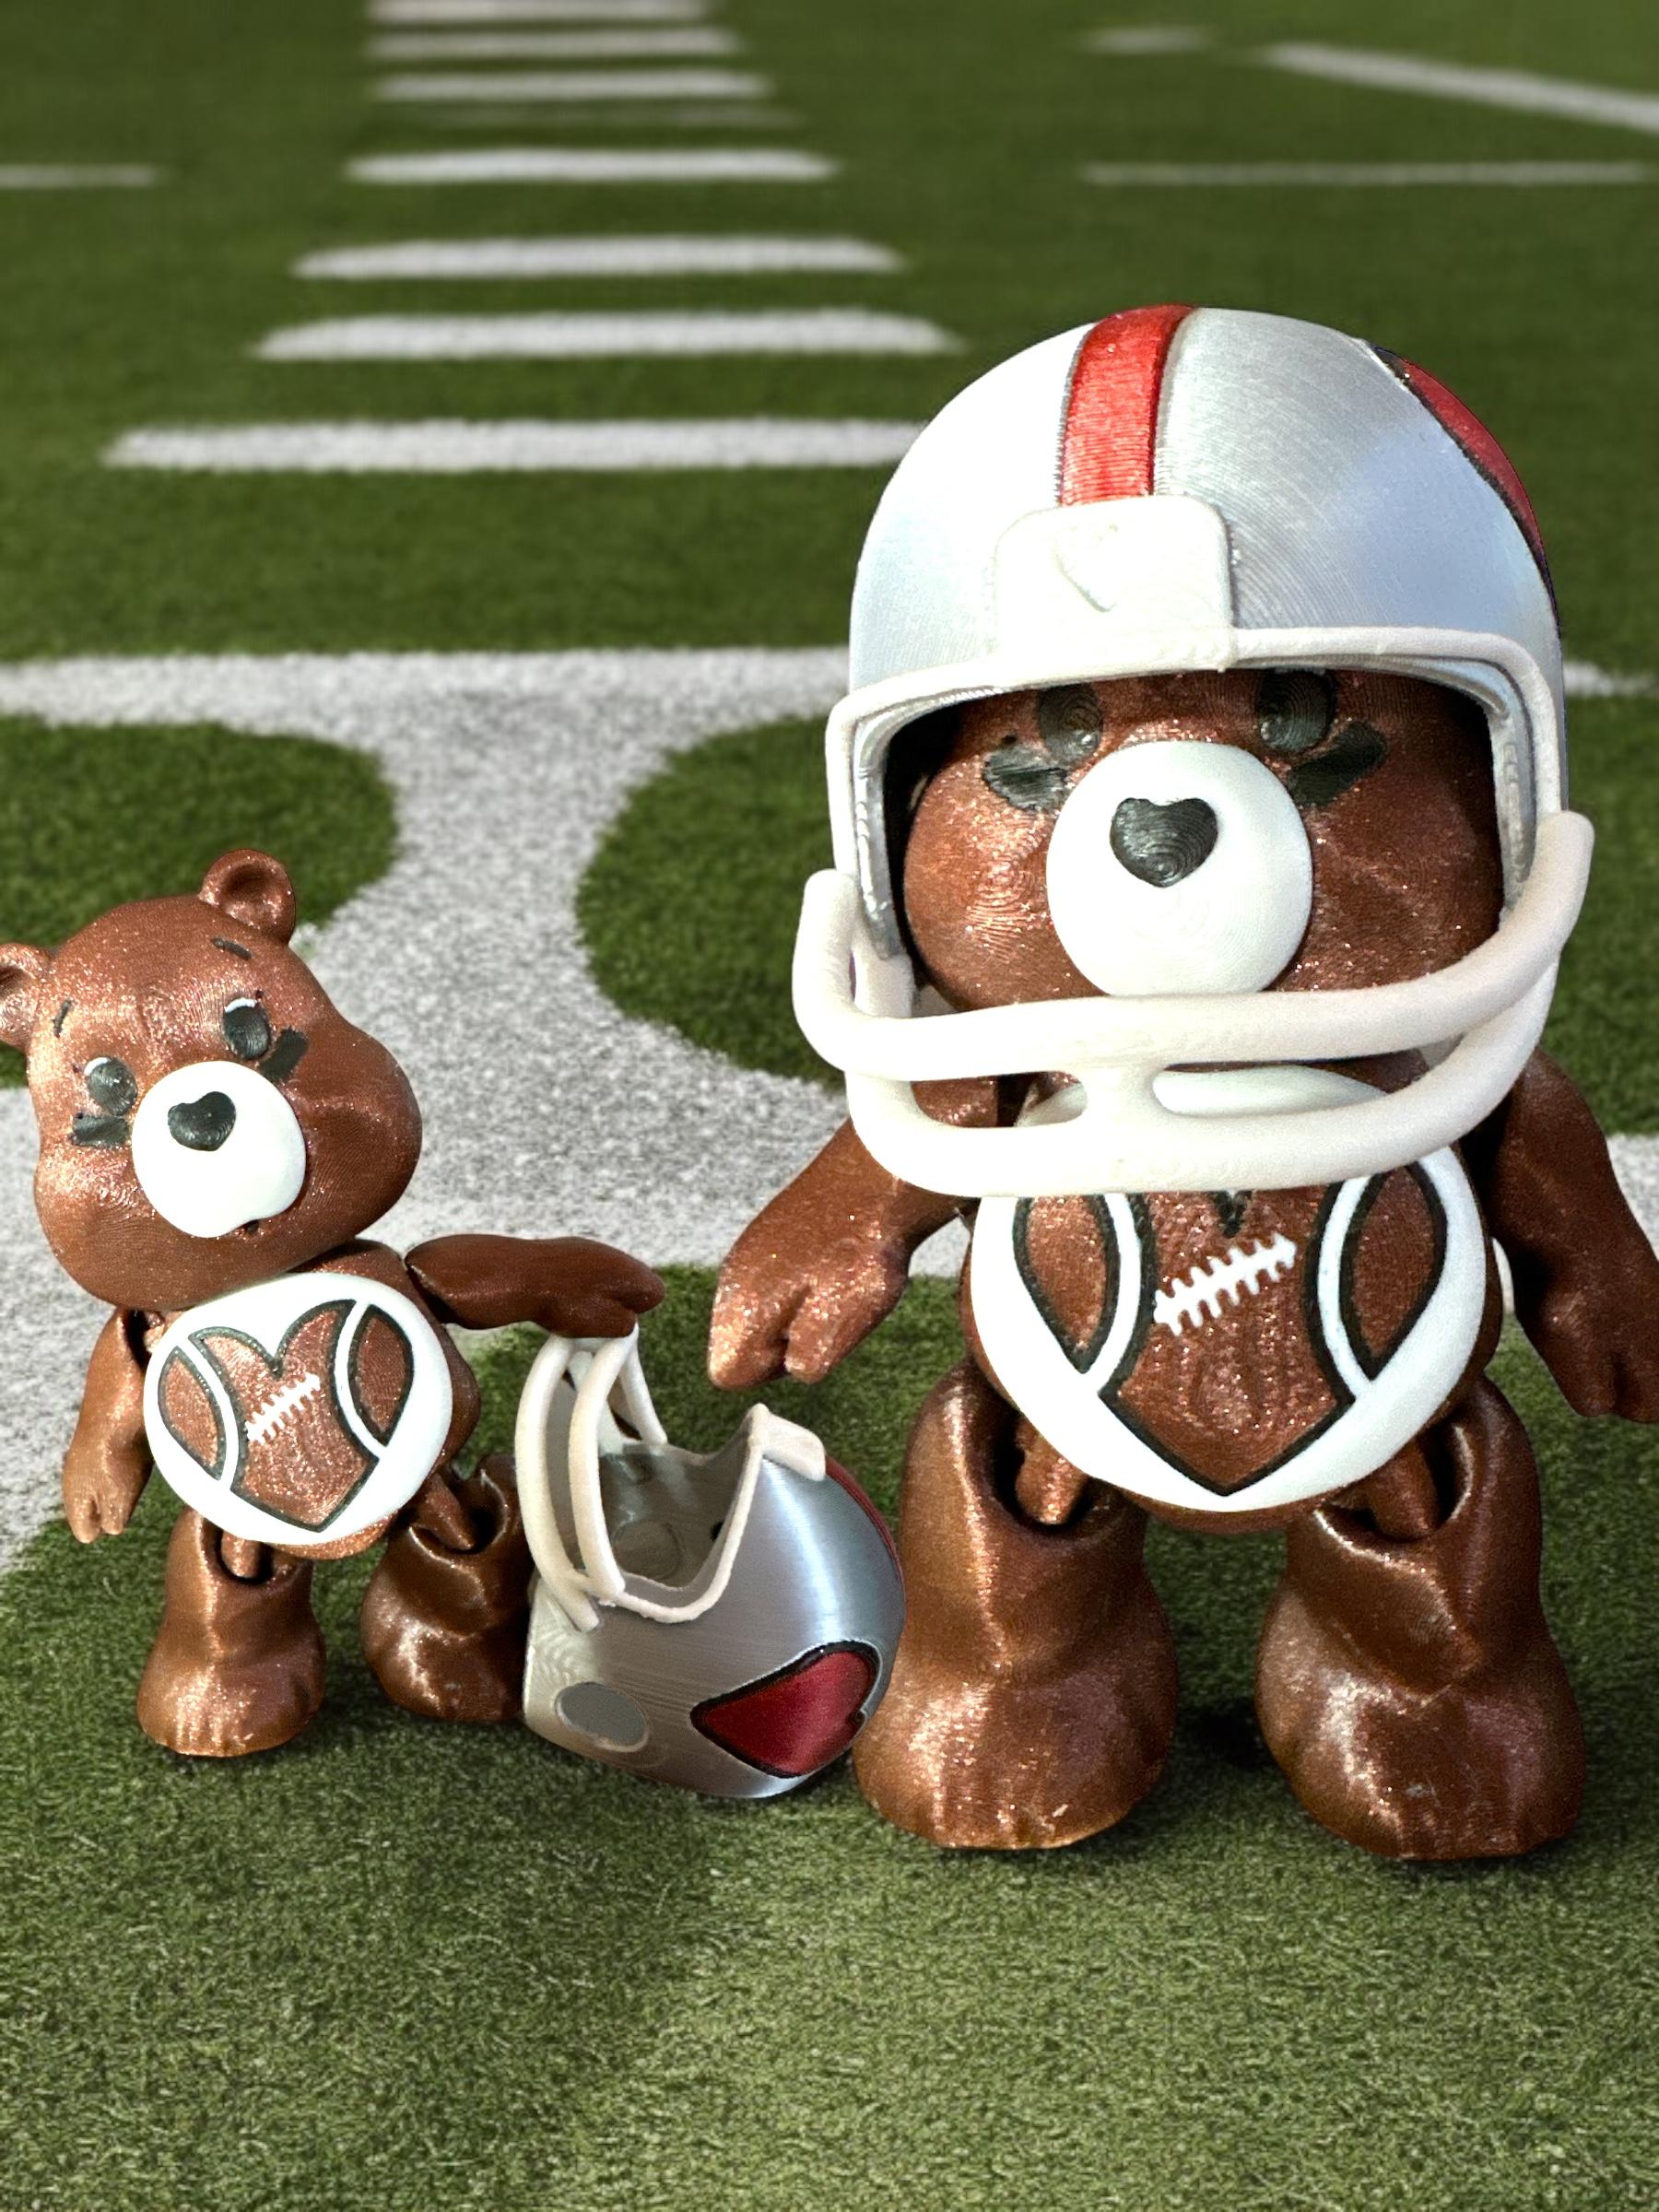 Lot's Of FootBall, Care Bear! Football Lover, Articulated, Print in Place, Flexi, Flexible, NFL,  3d model